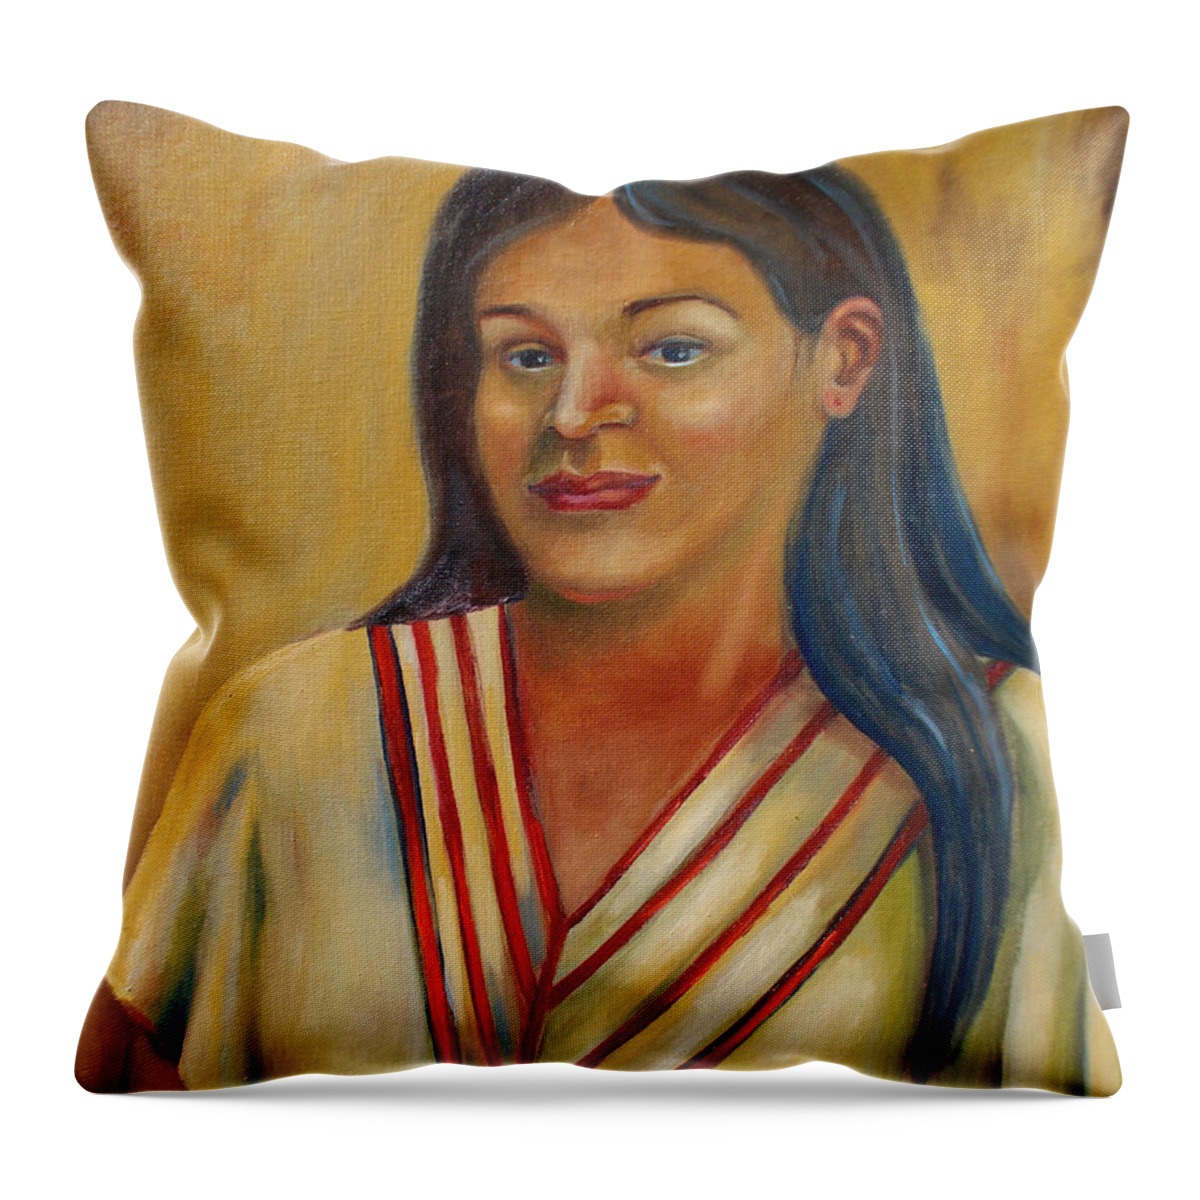 Aztec Throw Pillow featuring the painting Royal Maiden Xochitl by Lilibeth Andre